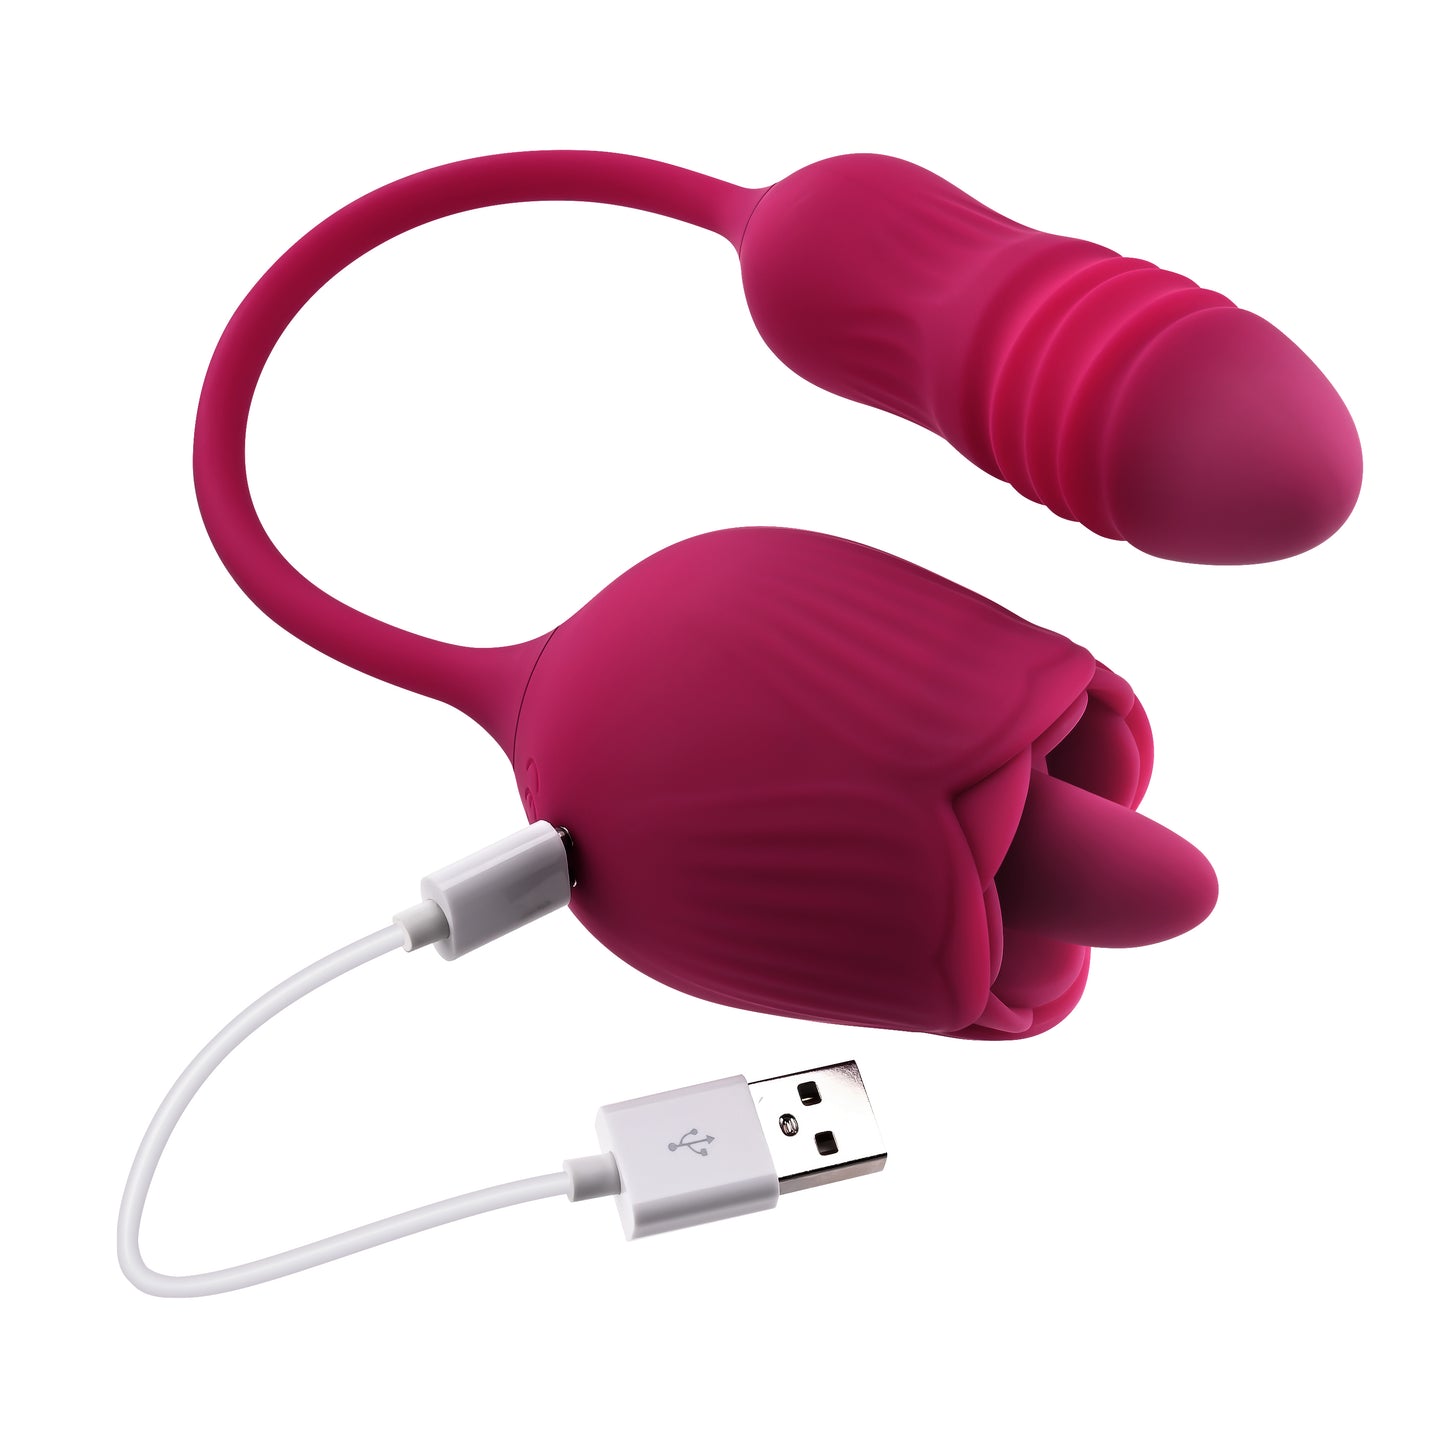 Image shows the magnetic charging cord attached to the Wild Rose Rechargeable Silicone Clitoral Stimulator from Evolved.